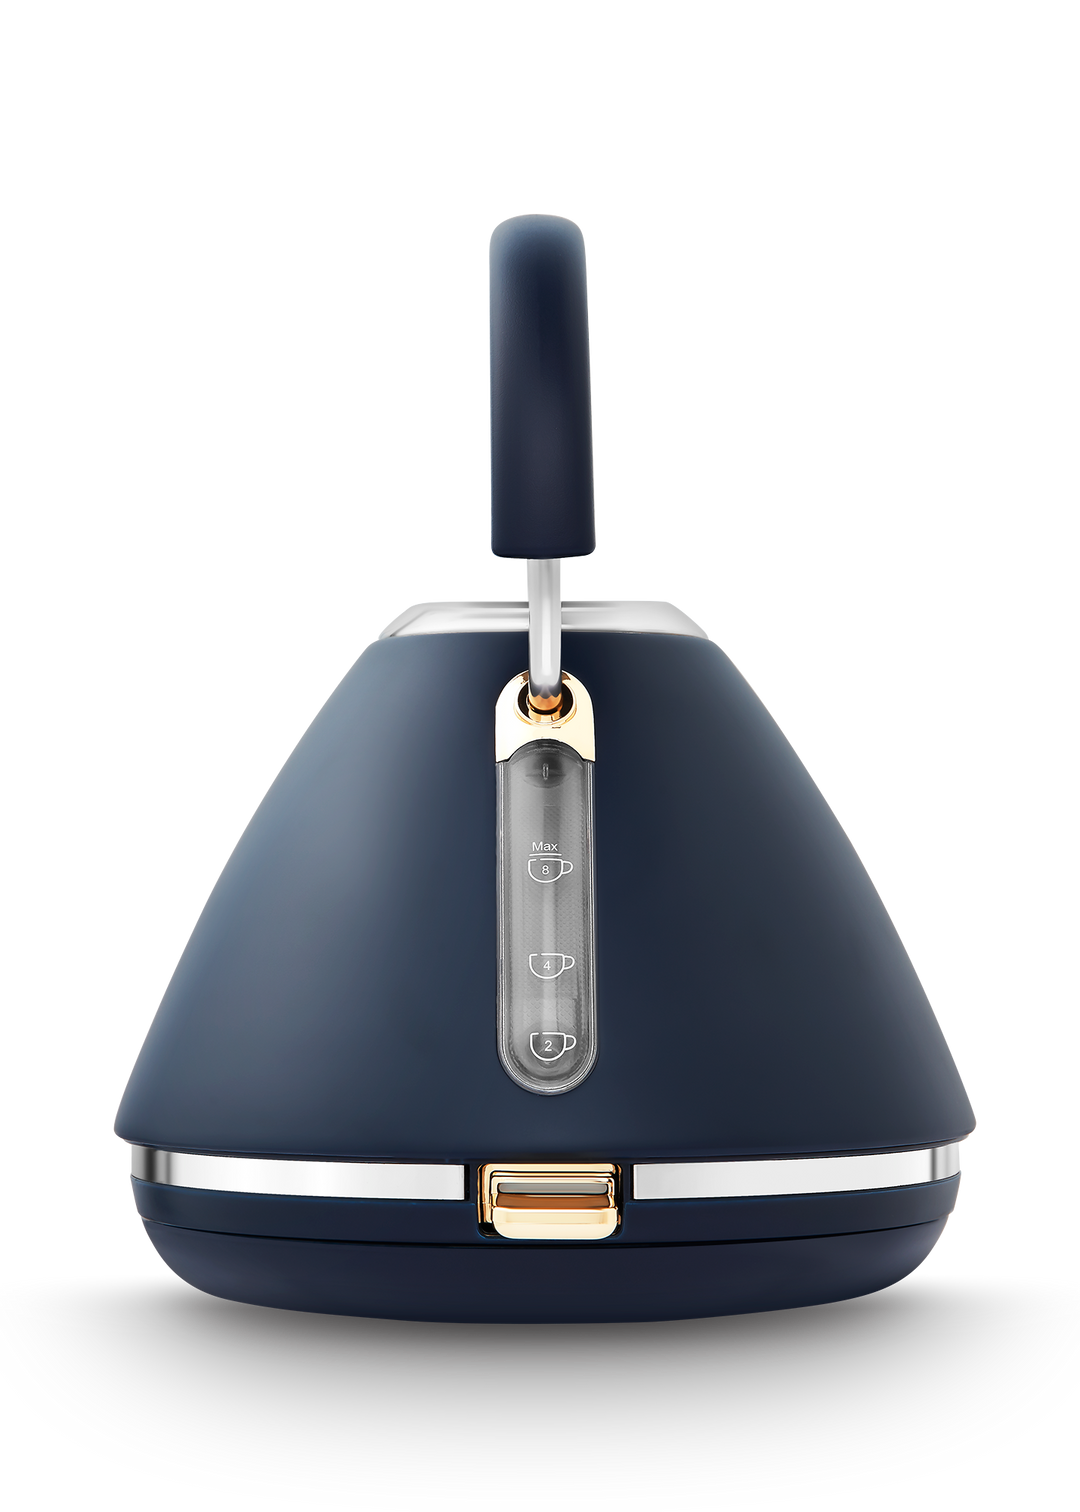 Accents Gold Pyramid Kettle Navy